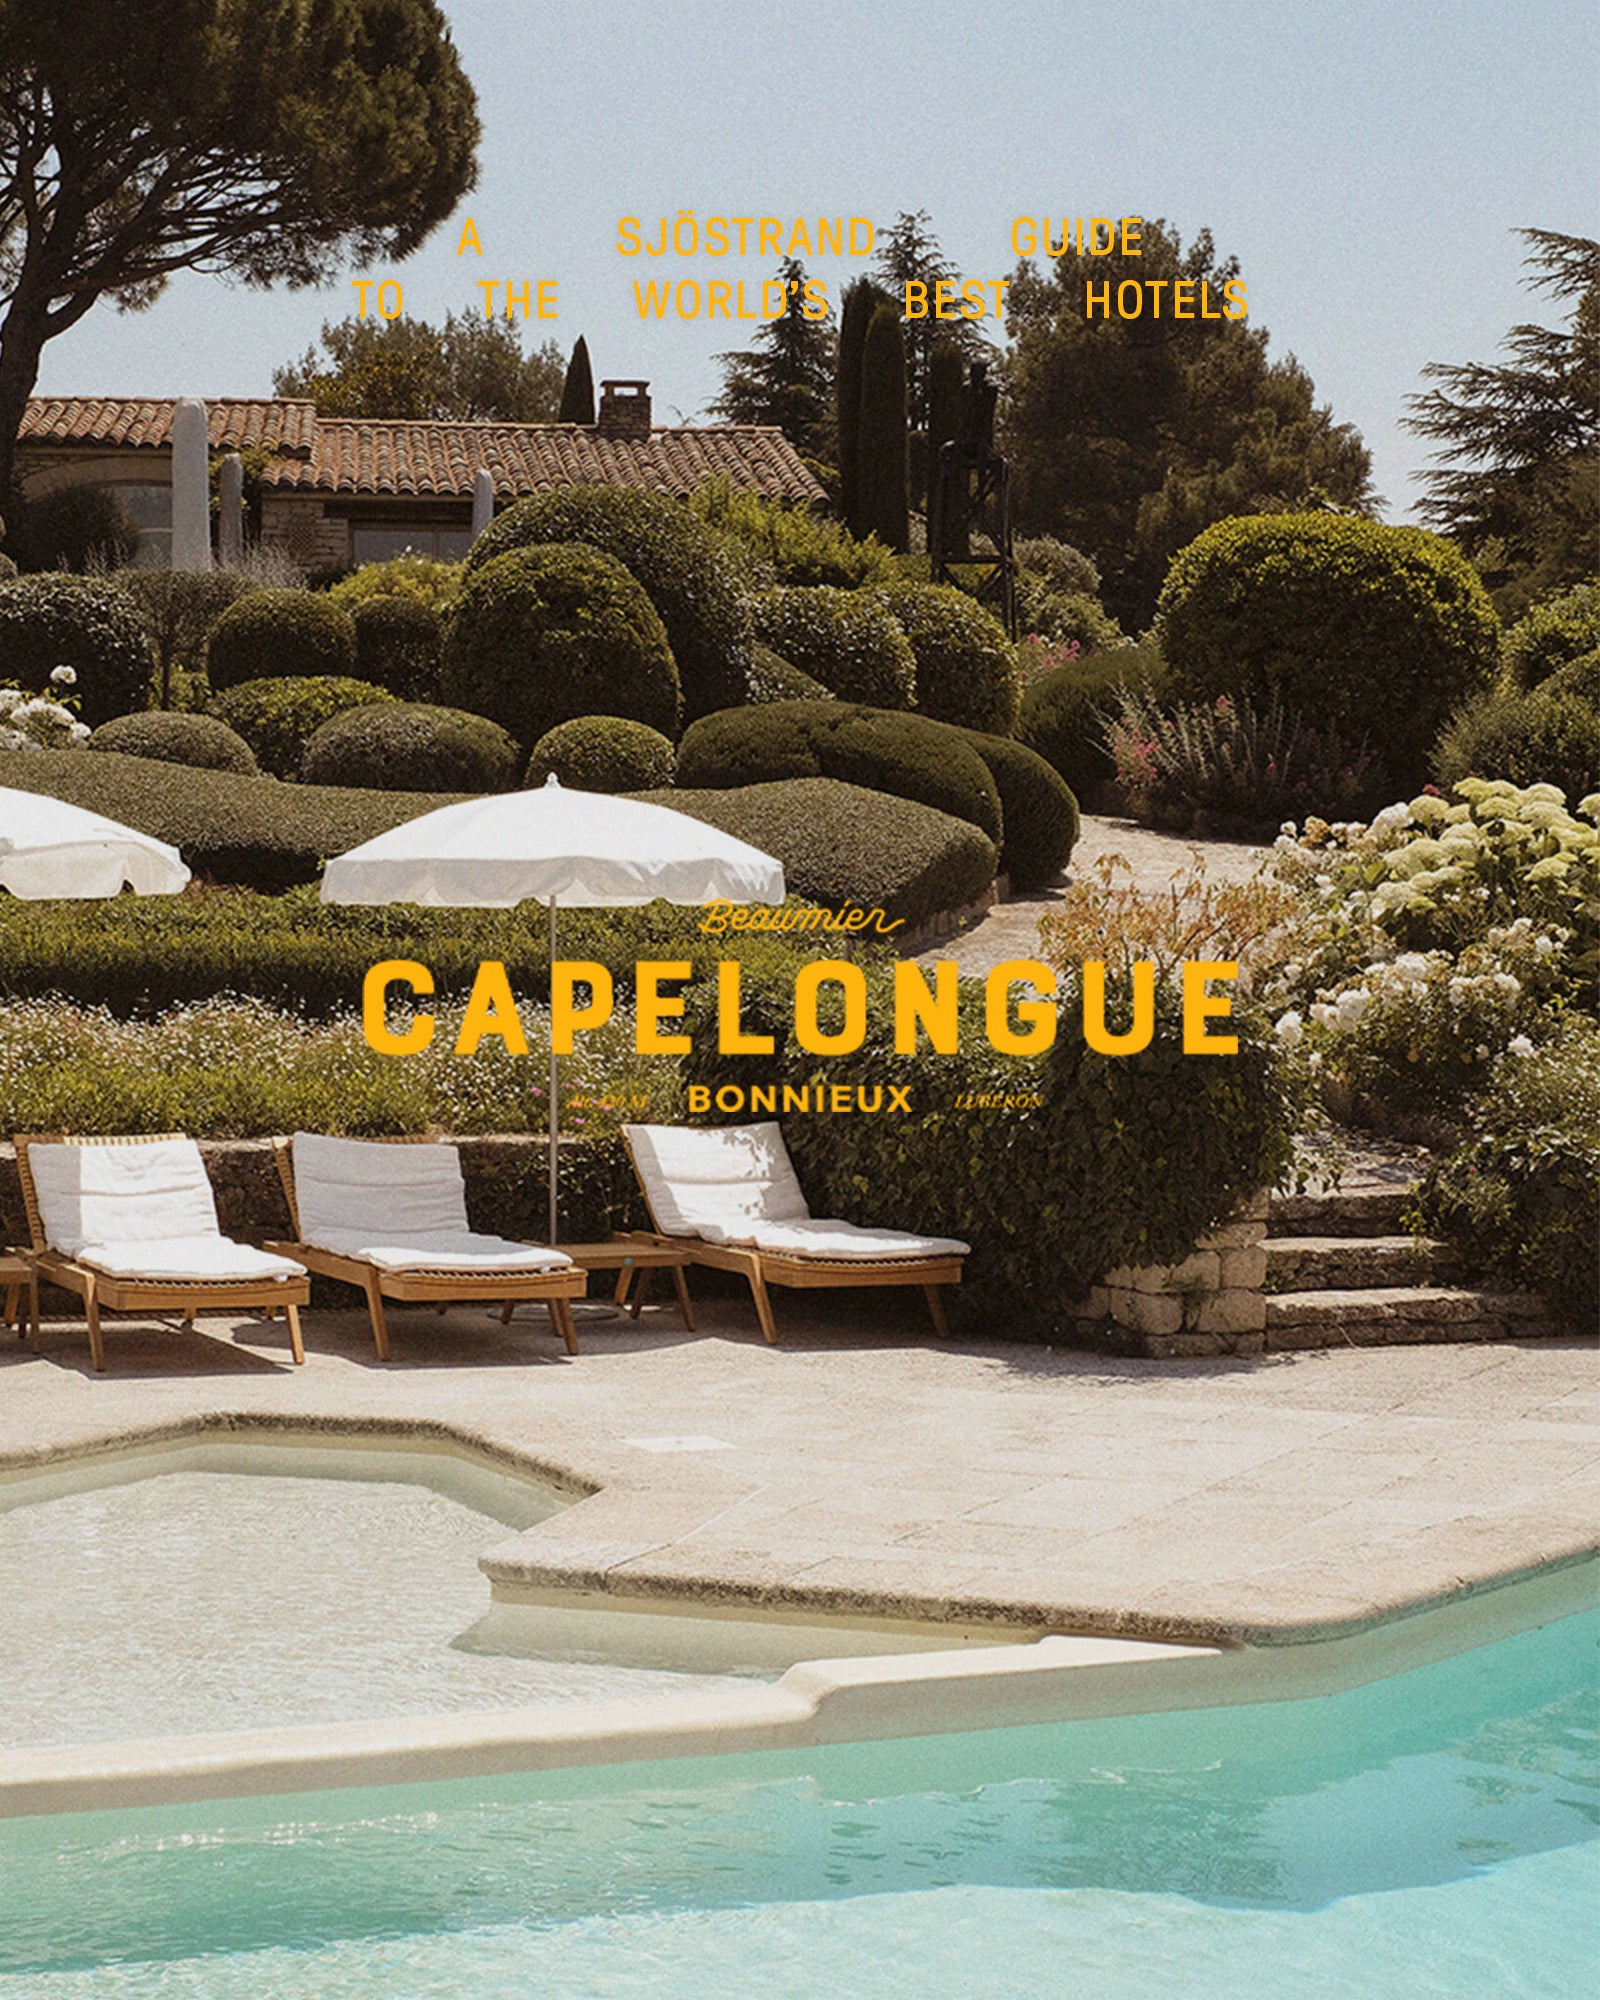 Capelongue - The  heritage and embodiment of Provence card image